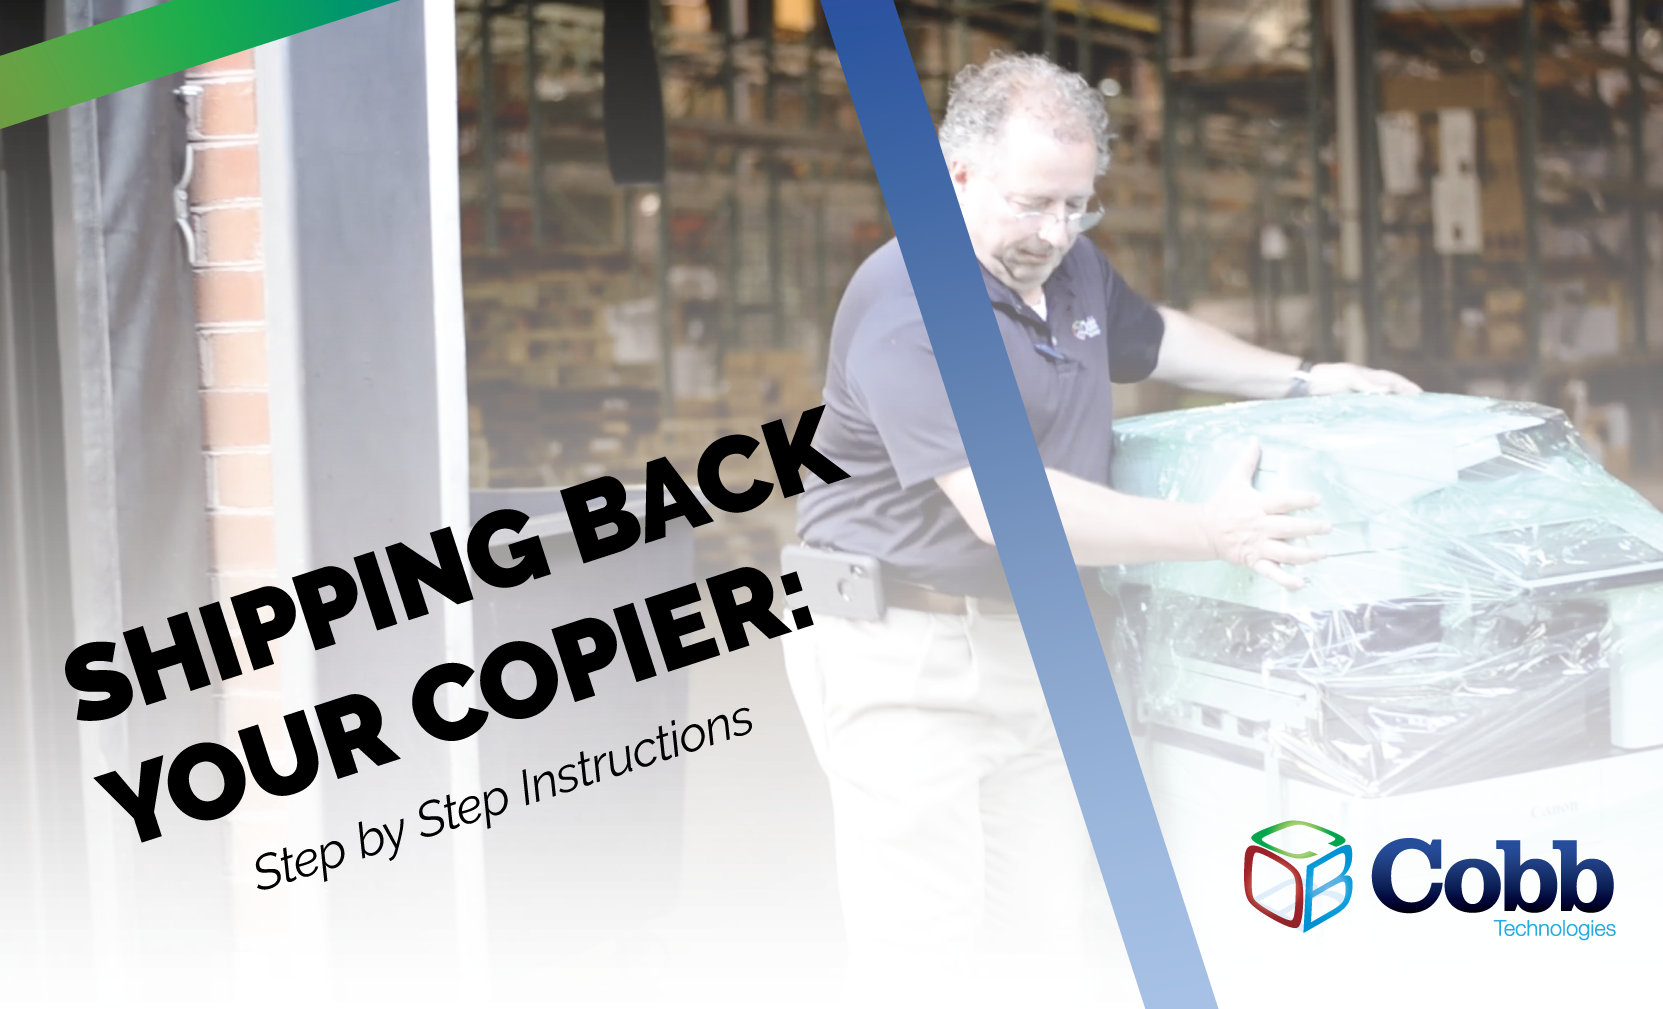 Shipping Back Your Leased Copier: Step By Step Instructions